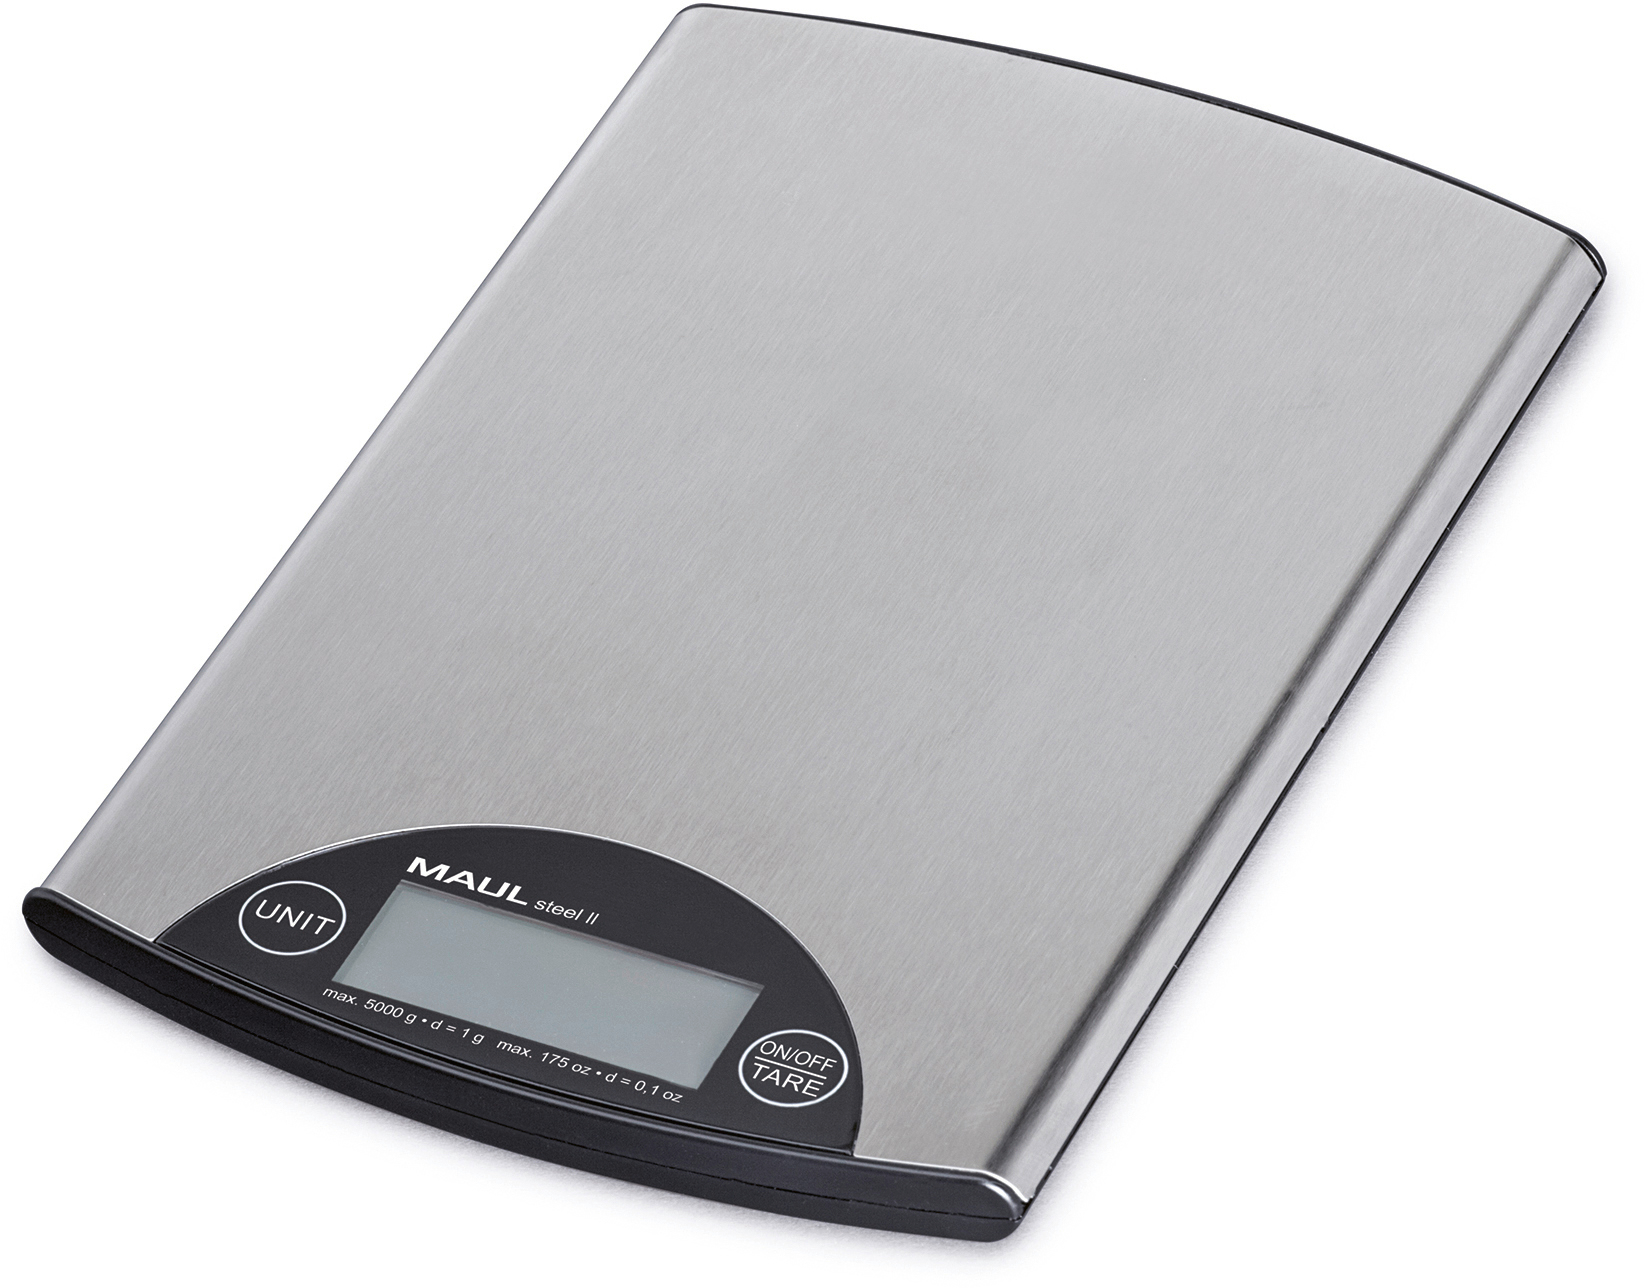 MAUL Briefwaage MAULsteel ll mit 1656096 Batterie, 5000g